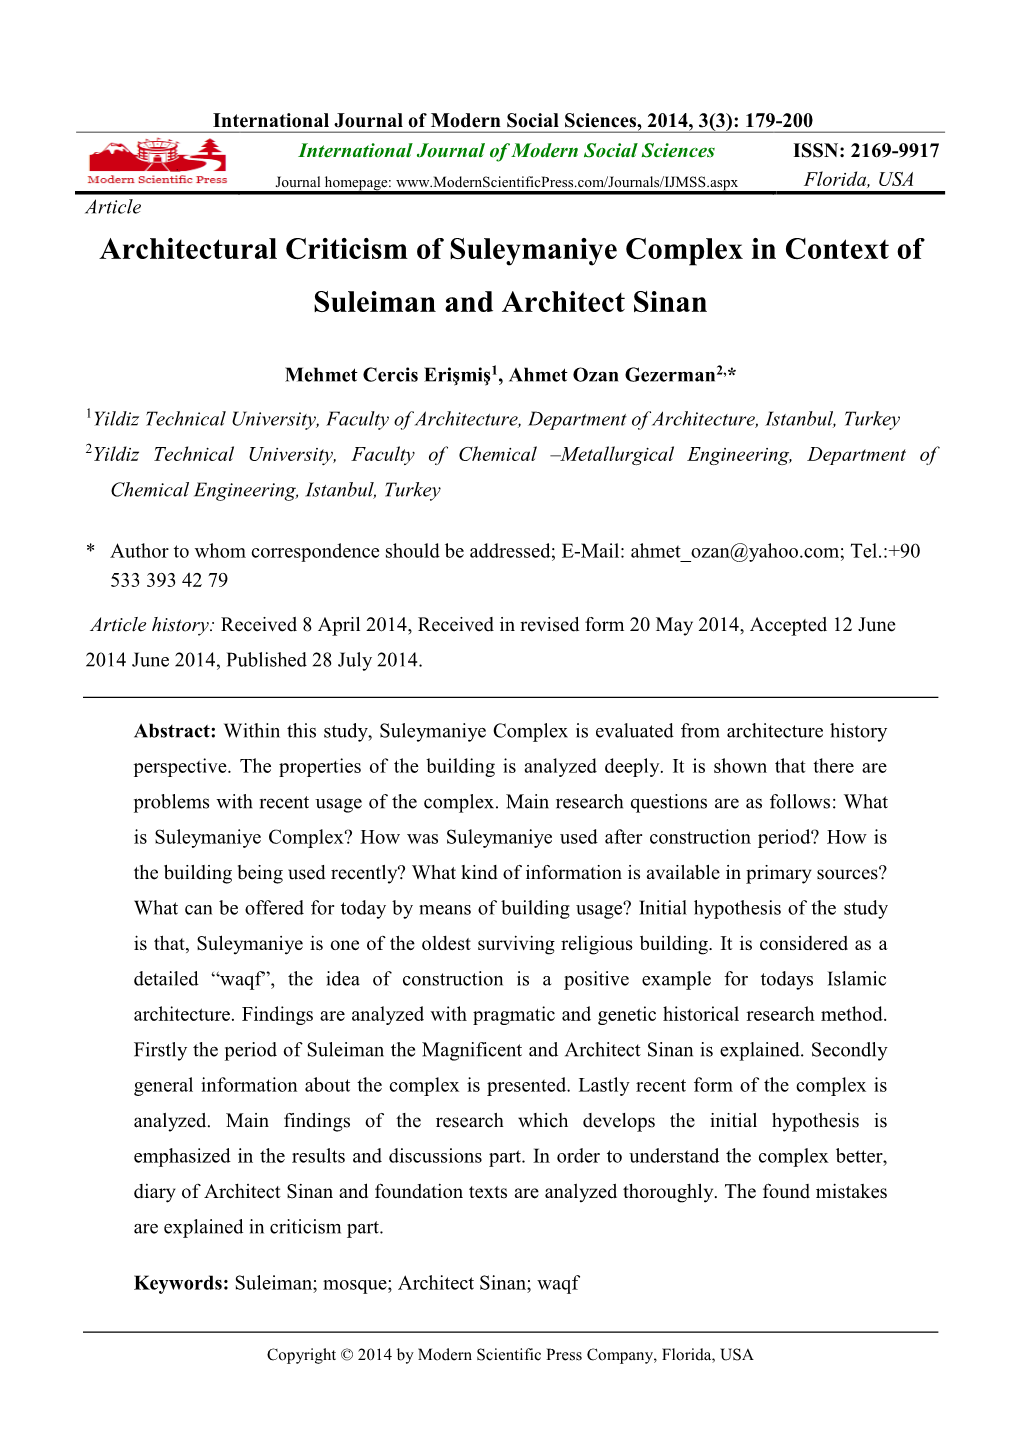 Architectural Criticism of Suleymaniye Complex in Context of Suleiman and Architect Sinan